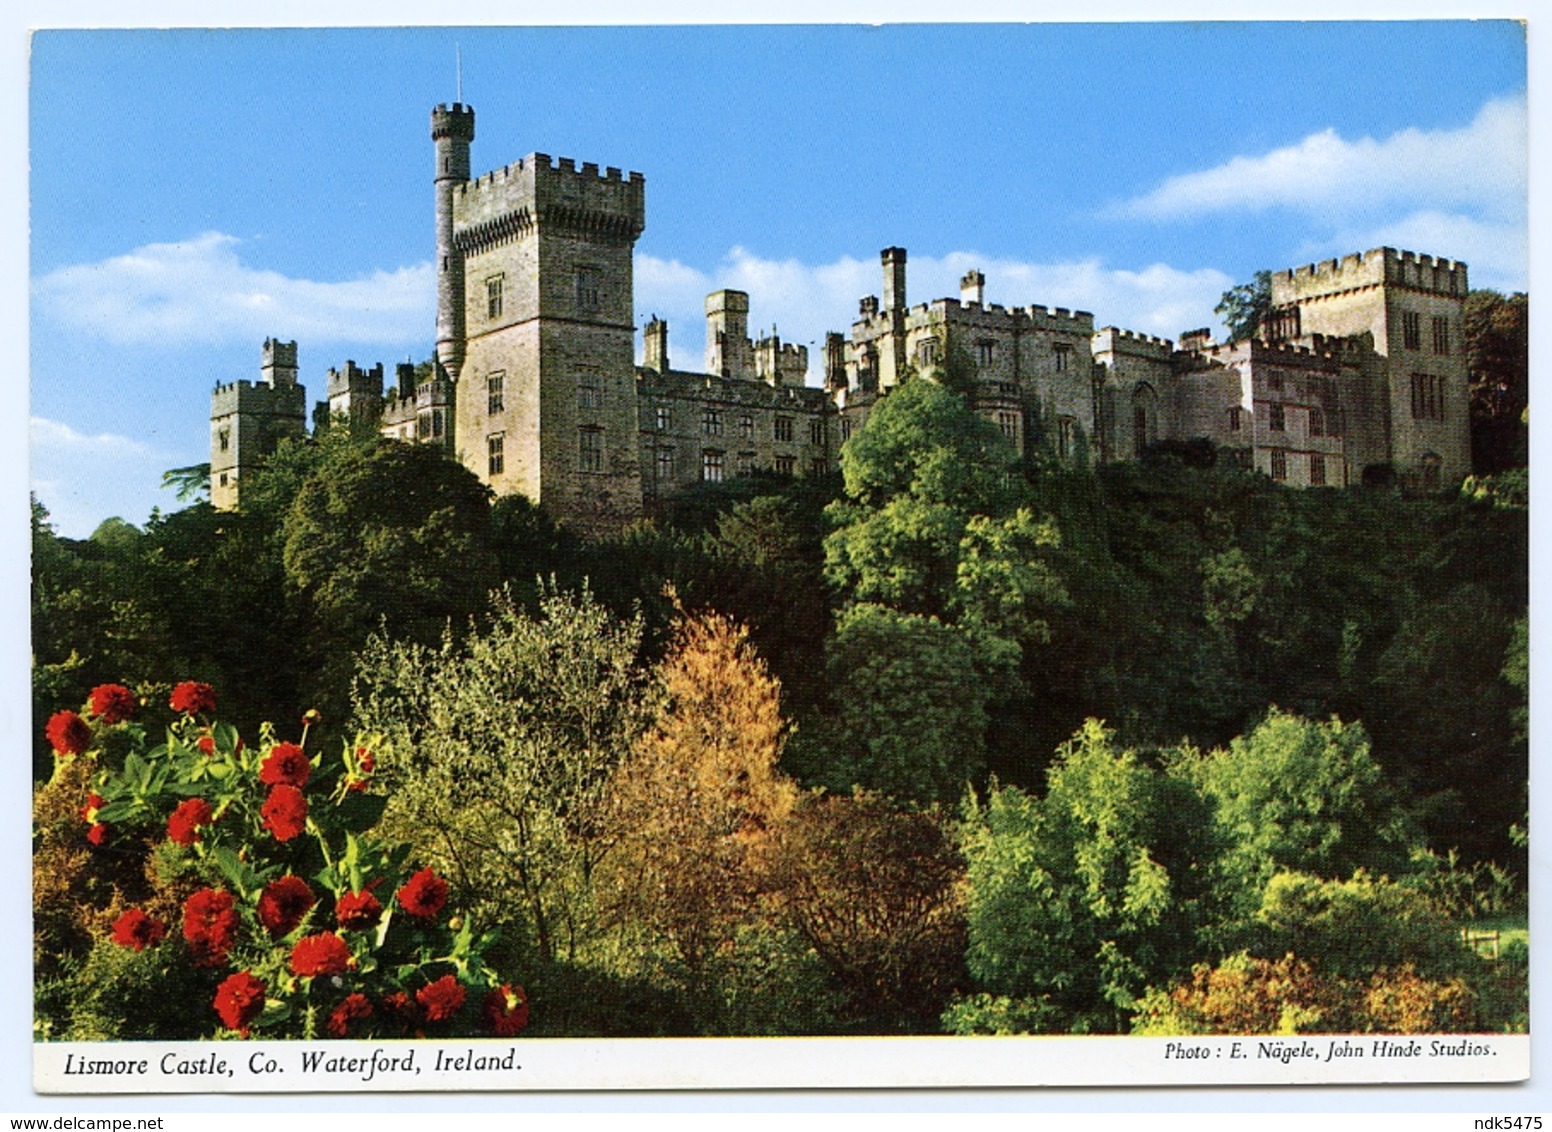 LISMORE CASTLE, CO. WATERFORD, IRELAND (JOHN HINDE) - Waterford